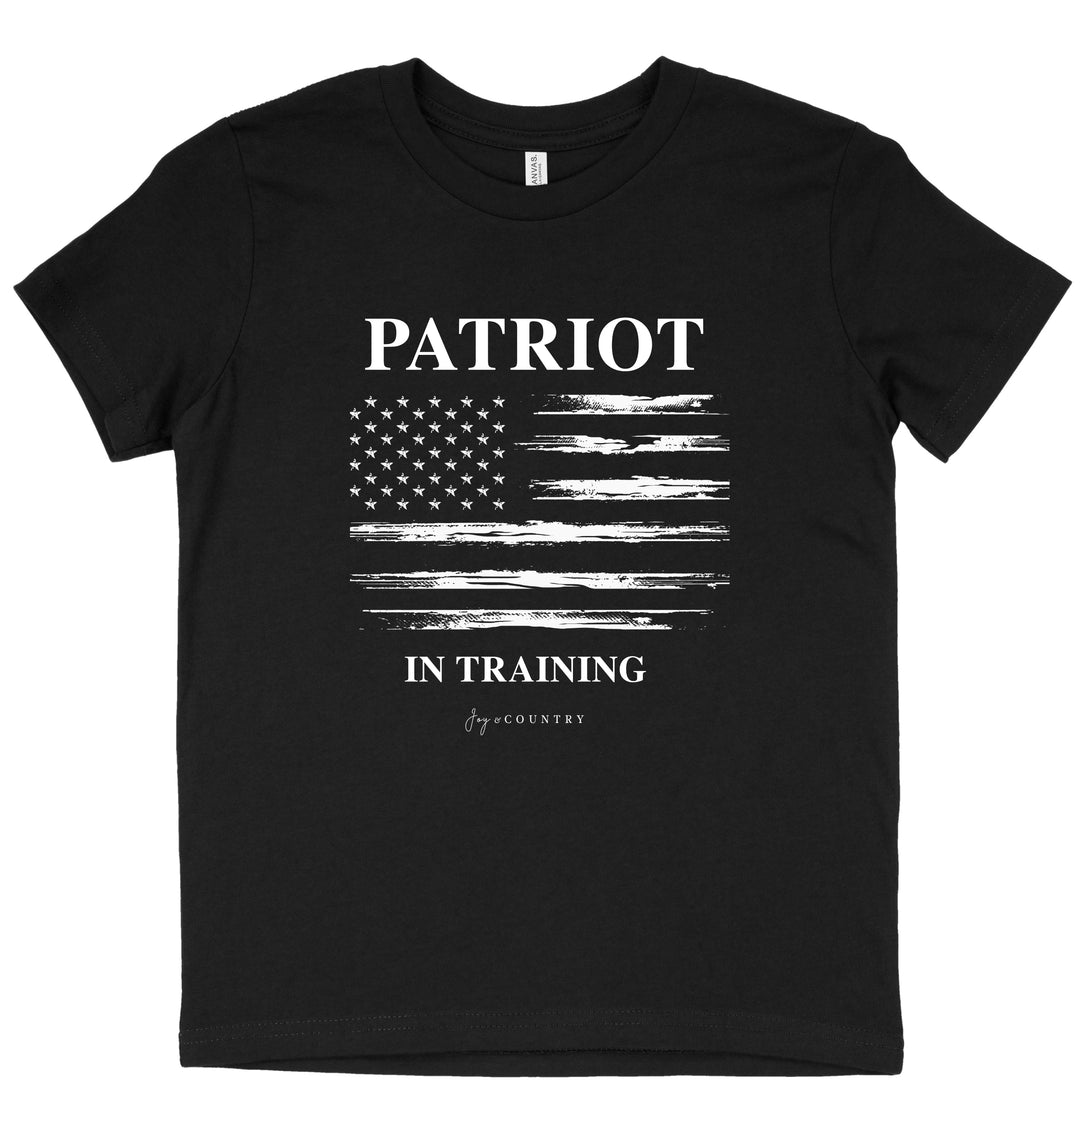 Patriot in Training - Youth Crew-Neck Tee (Youth size 6-20) - Joy & Country